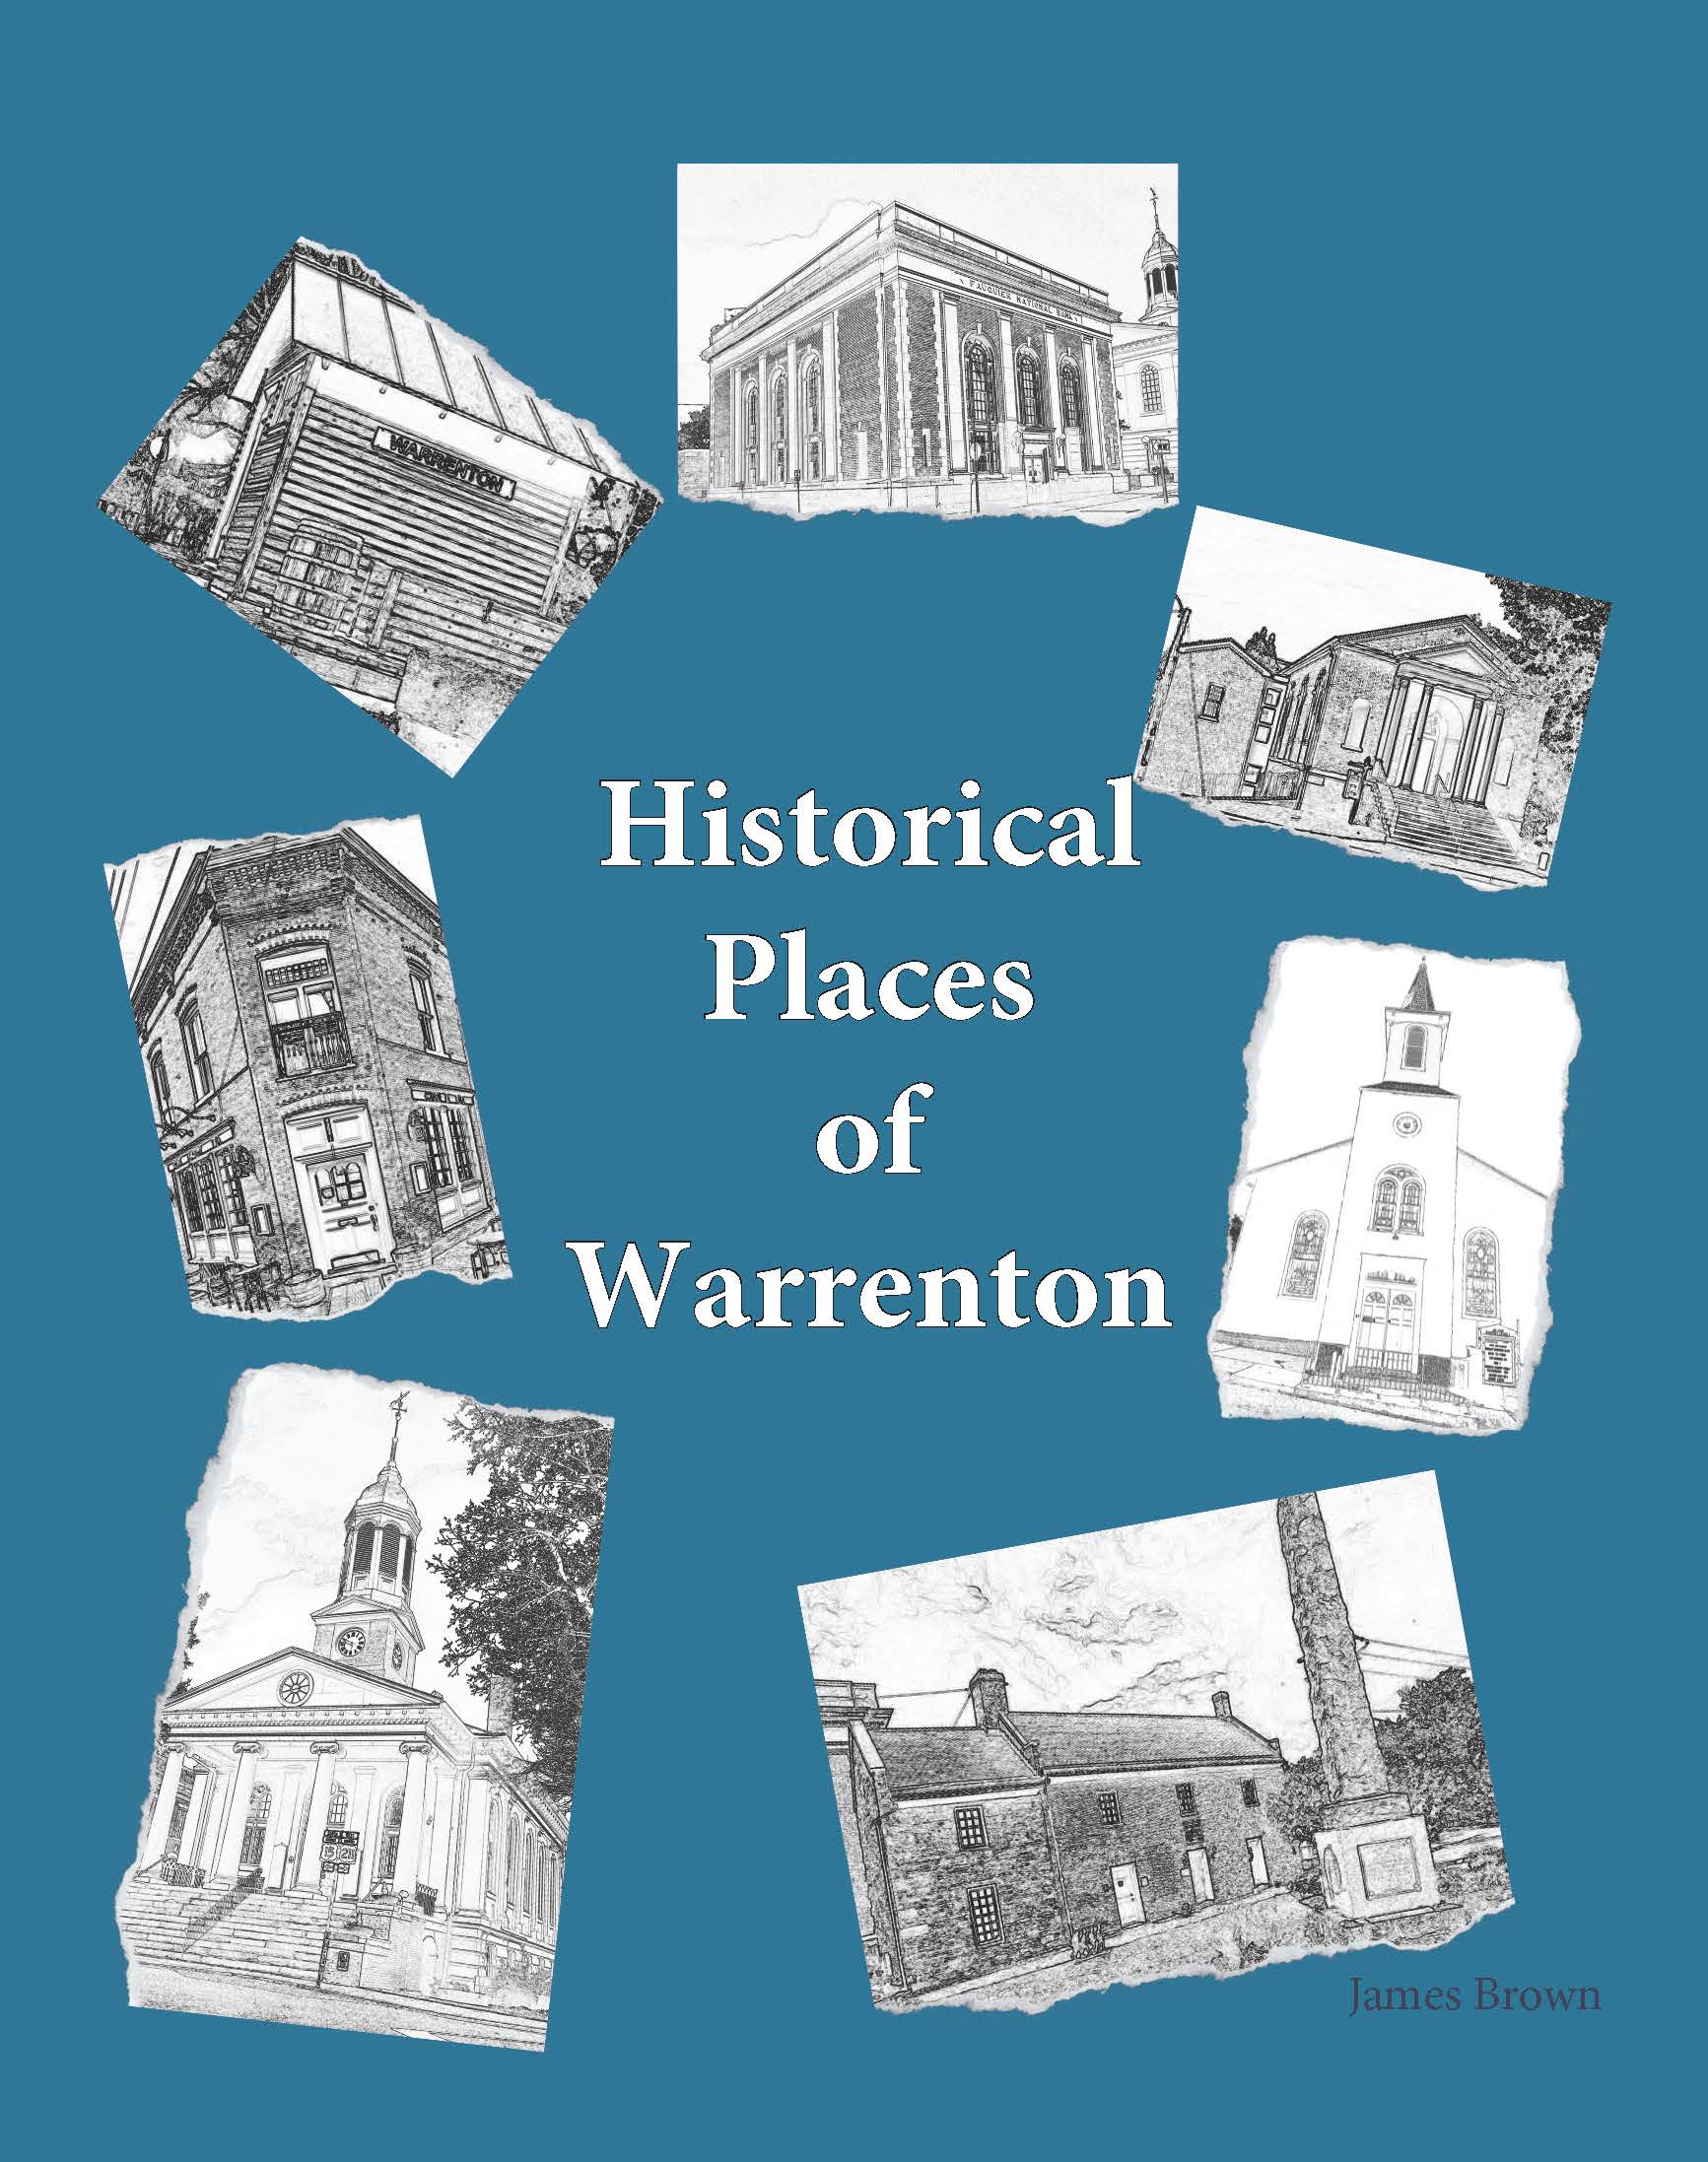 3d book display image of Historical Places of Warrenton